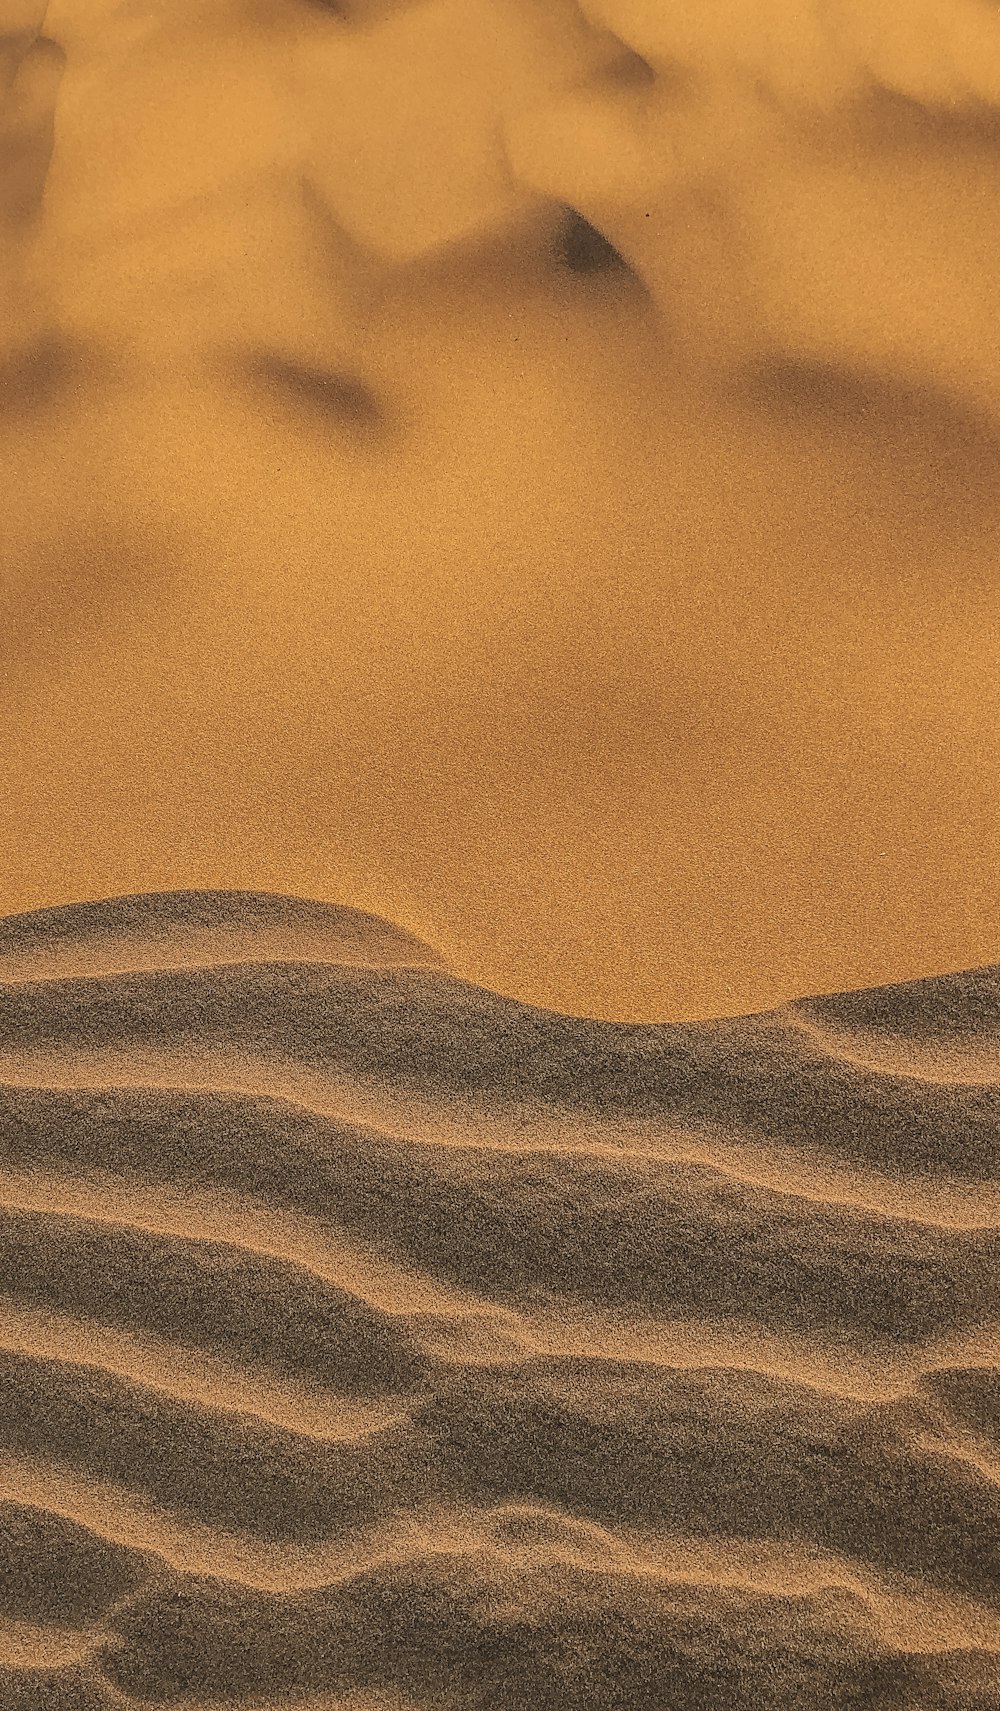 a picture of a desert with sand dunes